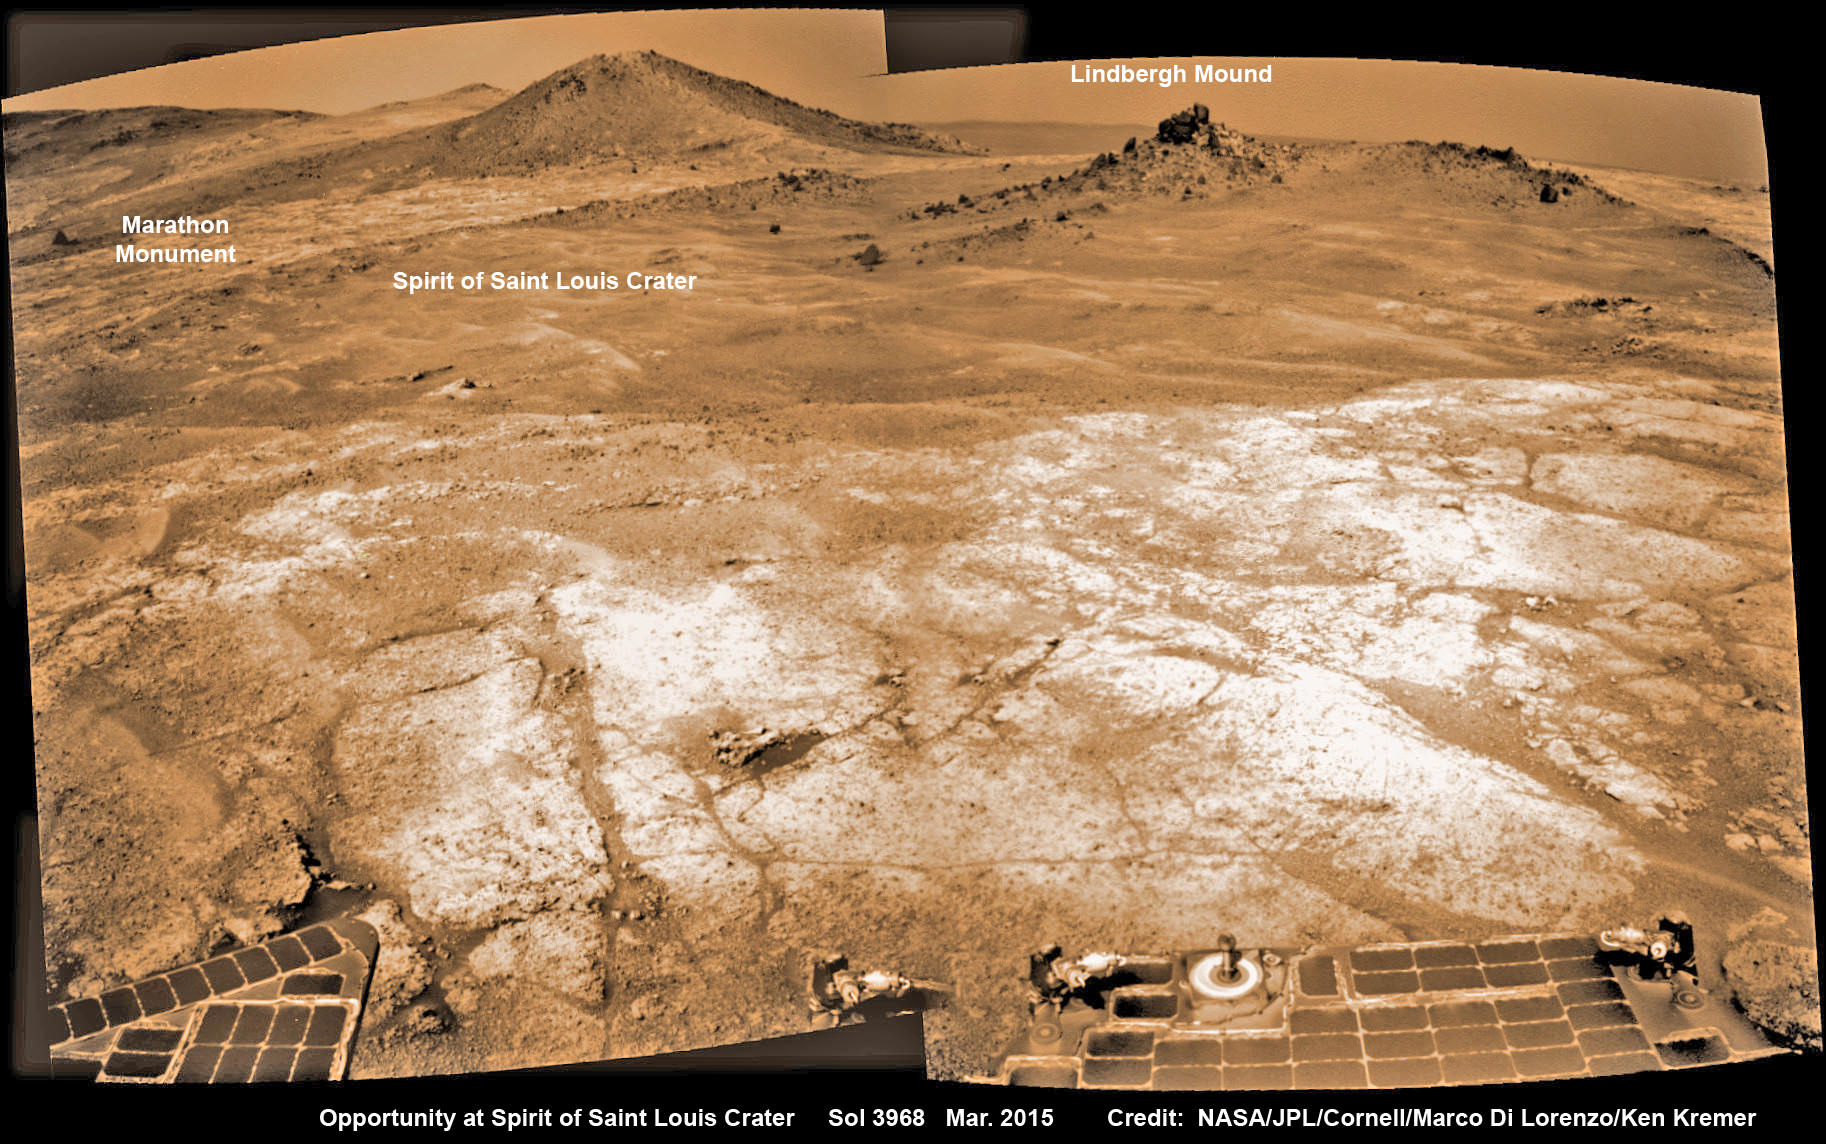 Opportunity’s view (annotated) on the day the NASA rover exceeded the distance of a marathon on the surface of Mars on March 24, 2015, Sol 3968 with features named in honor of Charles Lindbergh’s historic solo flight across the Atlantic Ocean in 1927. Rover stands at Spirit of Saint Louis Crater near mountaintop at Marathon Valley overlook and Martian cliffs at Endeavour crater holding deposits of water altered clay minerals.  This navcam camera photo mosaic was assembled from images taken on Sol 3968 (March 24, 2015) and colorized.  Credit: NASA/JPL/Cornell/Marco Di Lorenzo/Ken Kremer/kenkremer.com